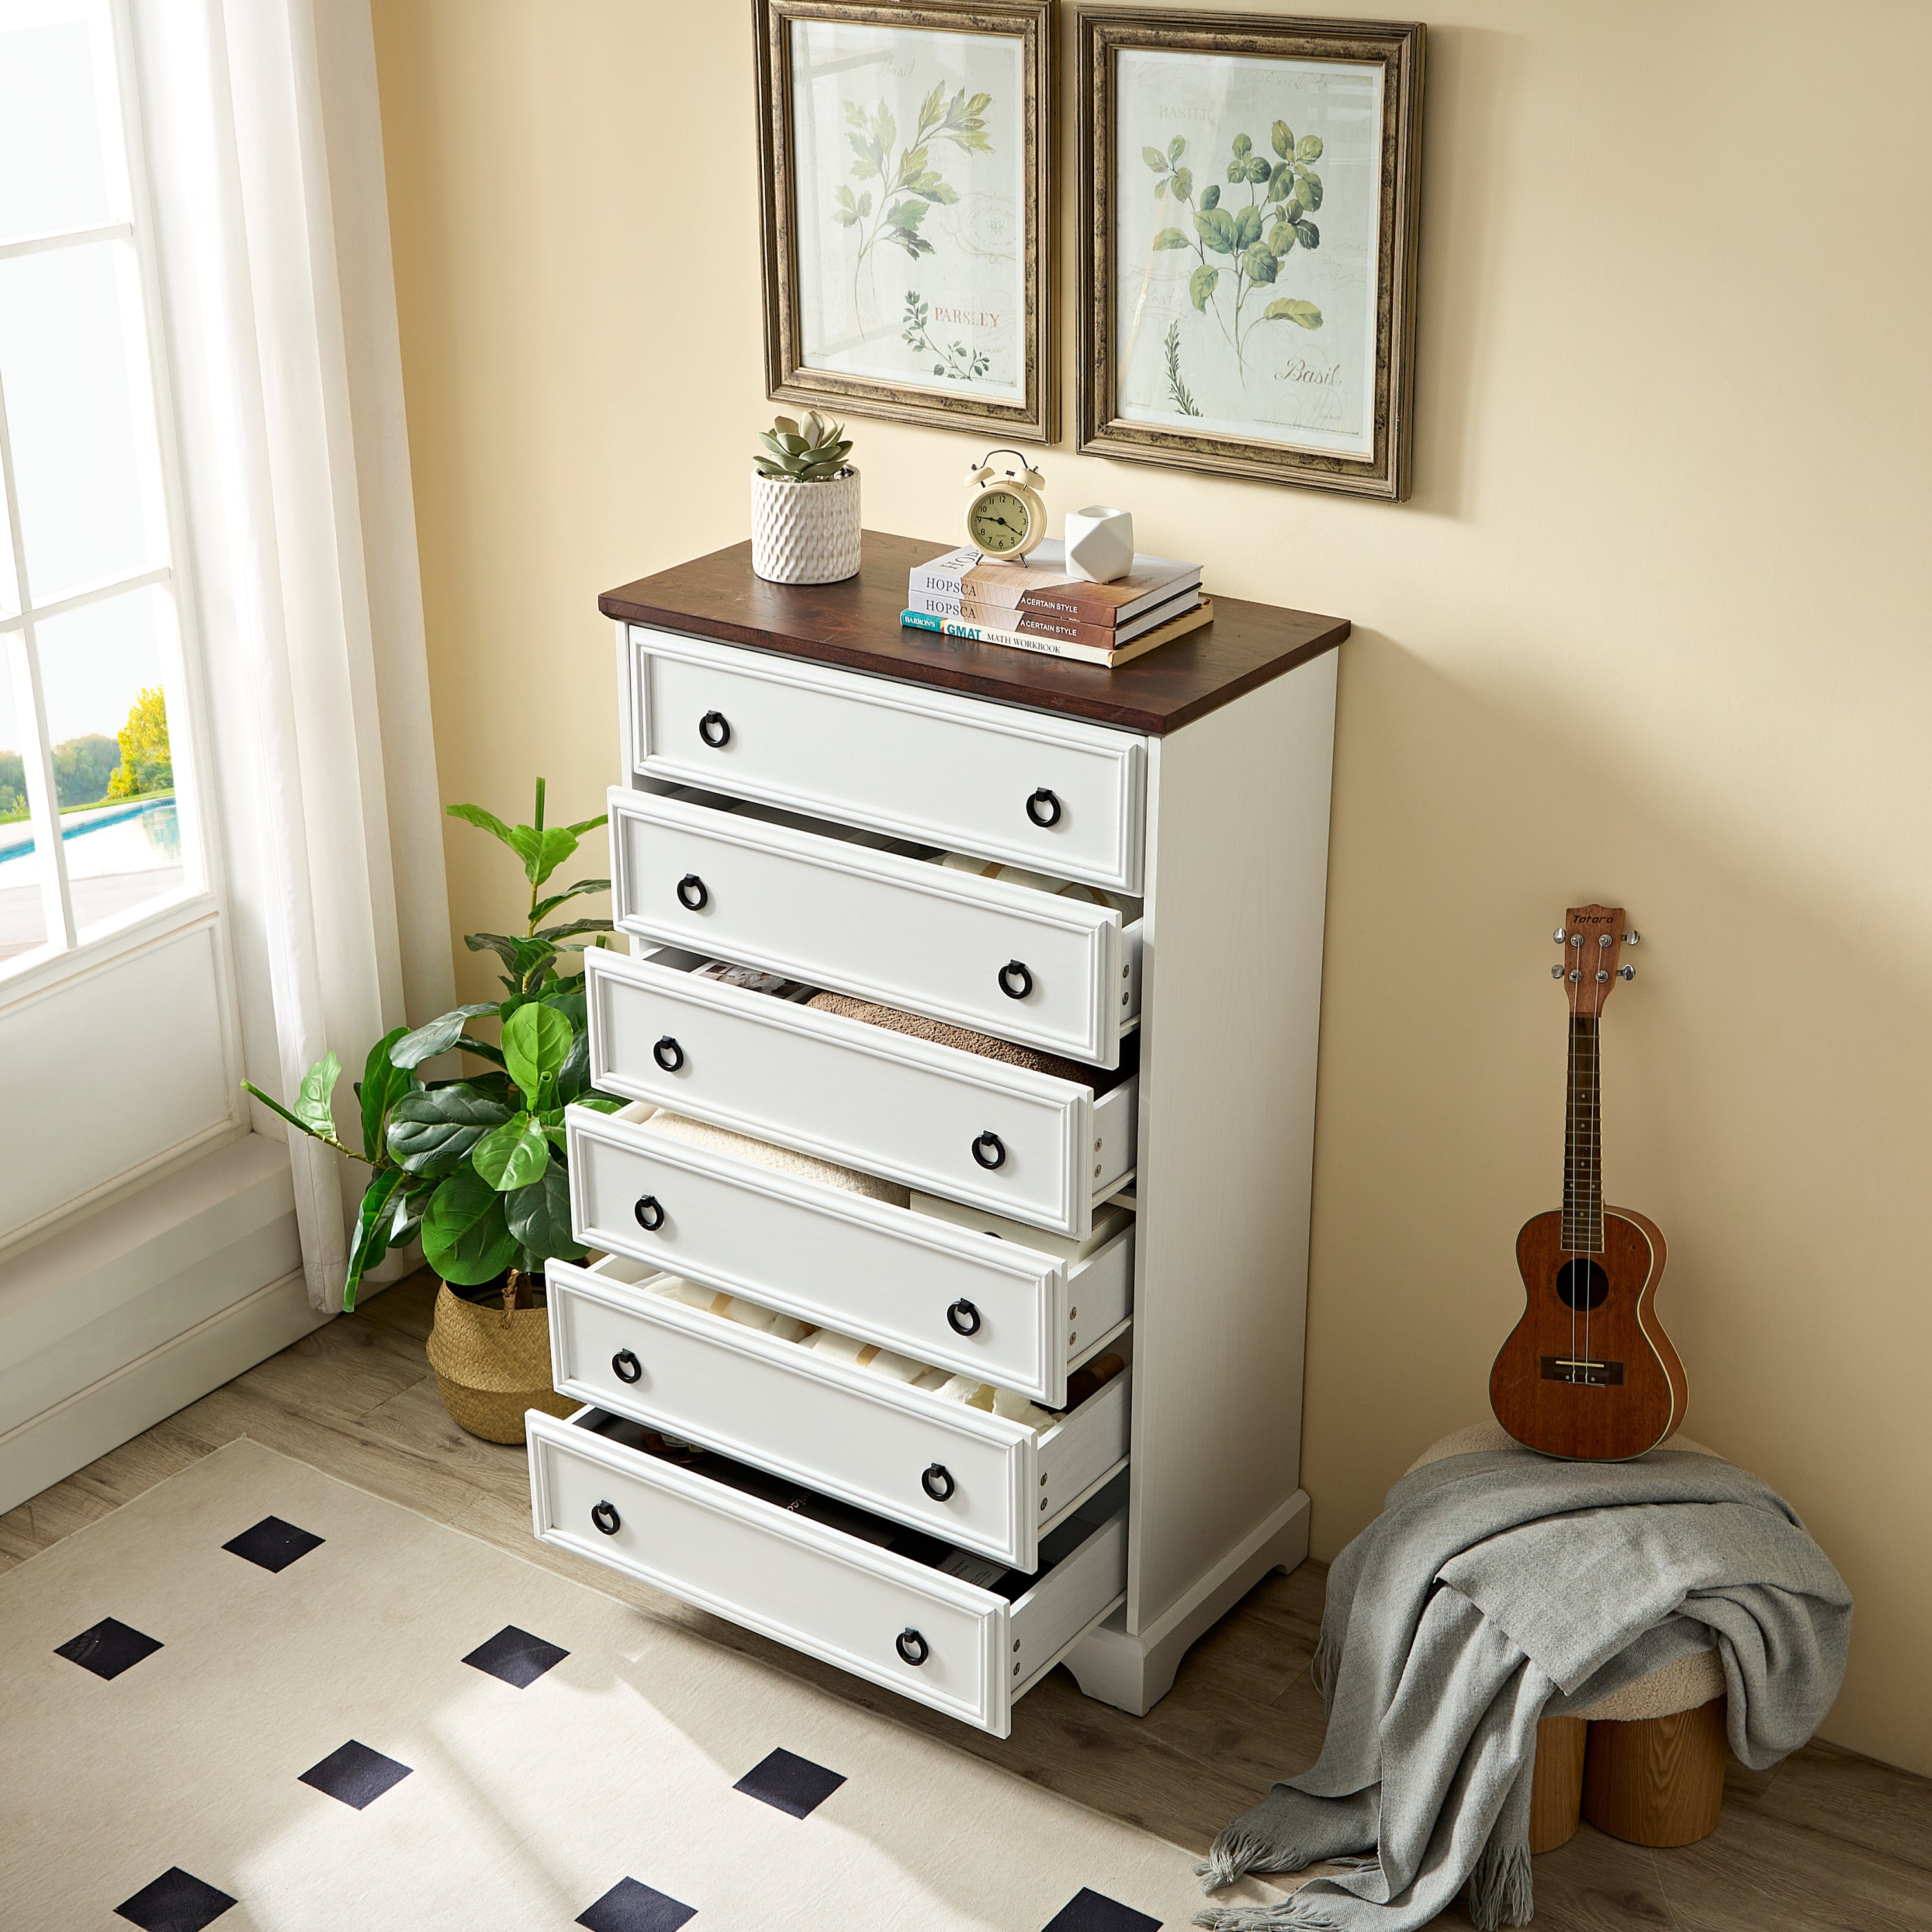 Modern 6 Drawer Dresser, Dressers for Bedroom, Tall Chest of Drawers Closet Organizers & Storage Clothes - Easy Pull Handle, Textured Borders Living Room, Hallway,L 29.53''*W15.75''*H48.03''White